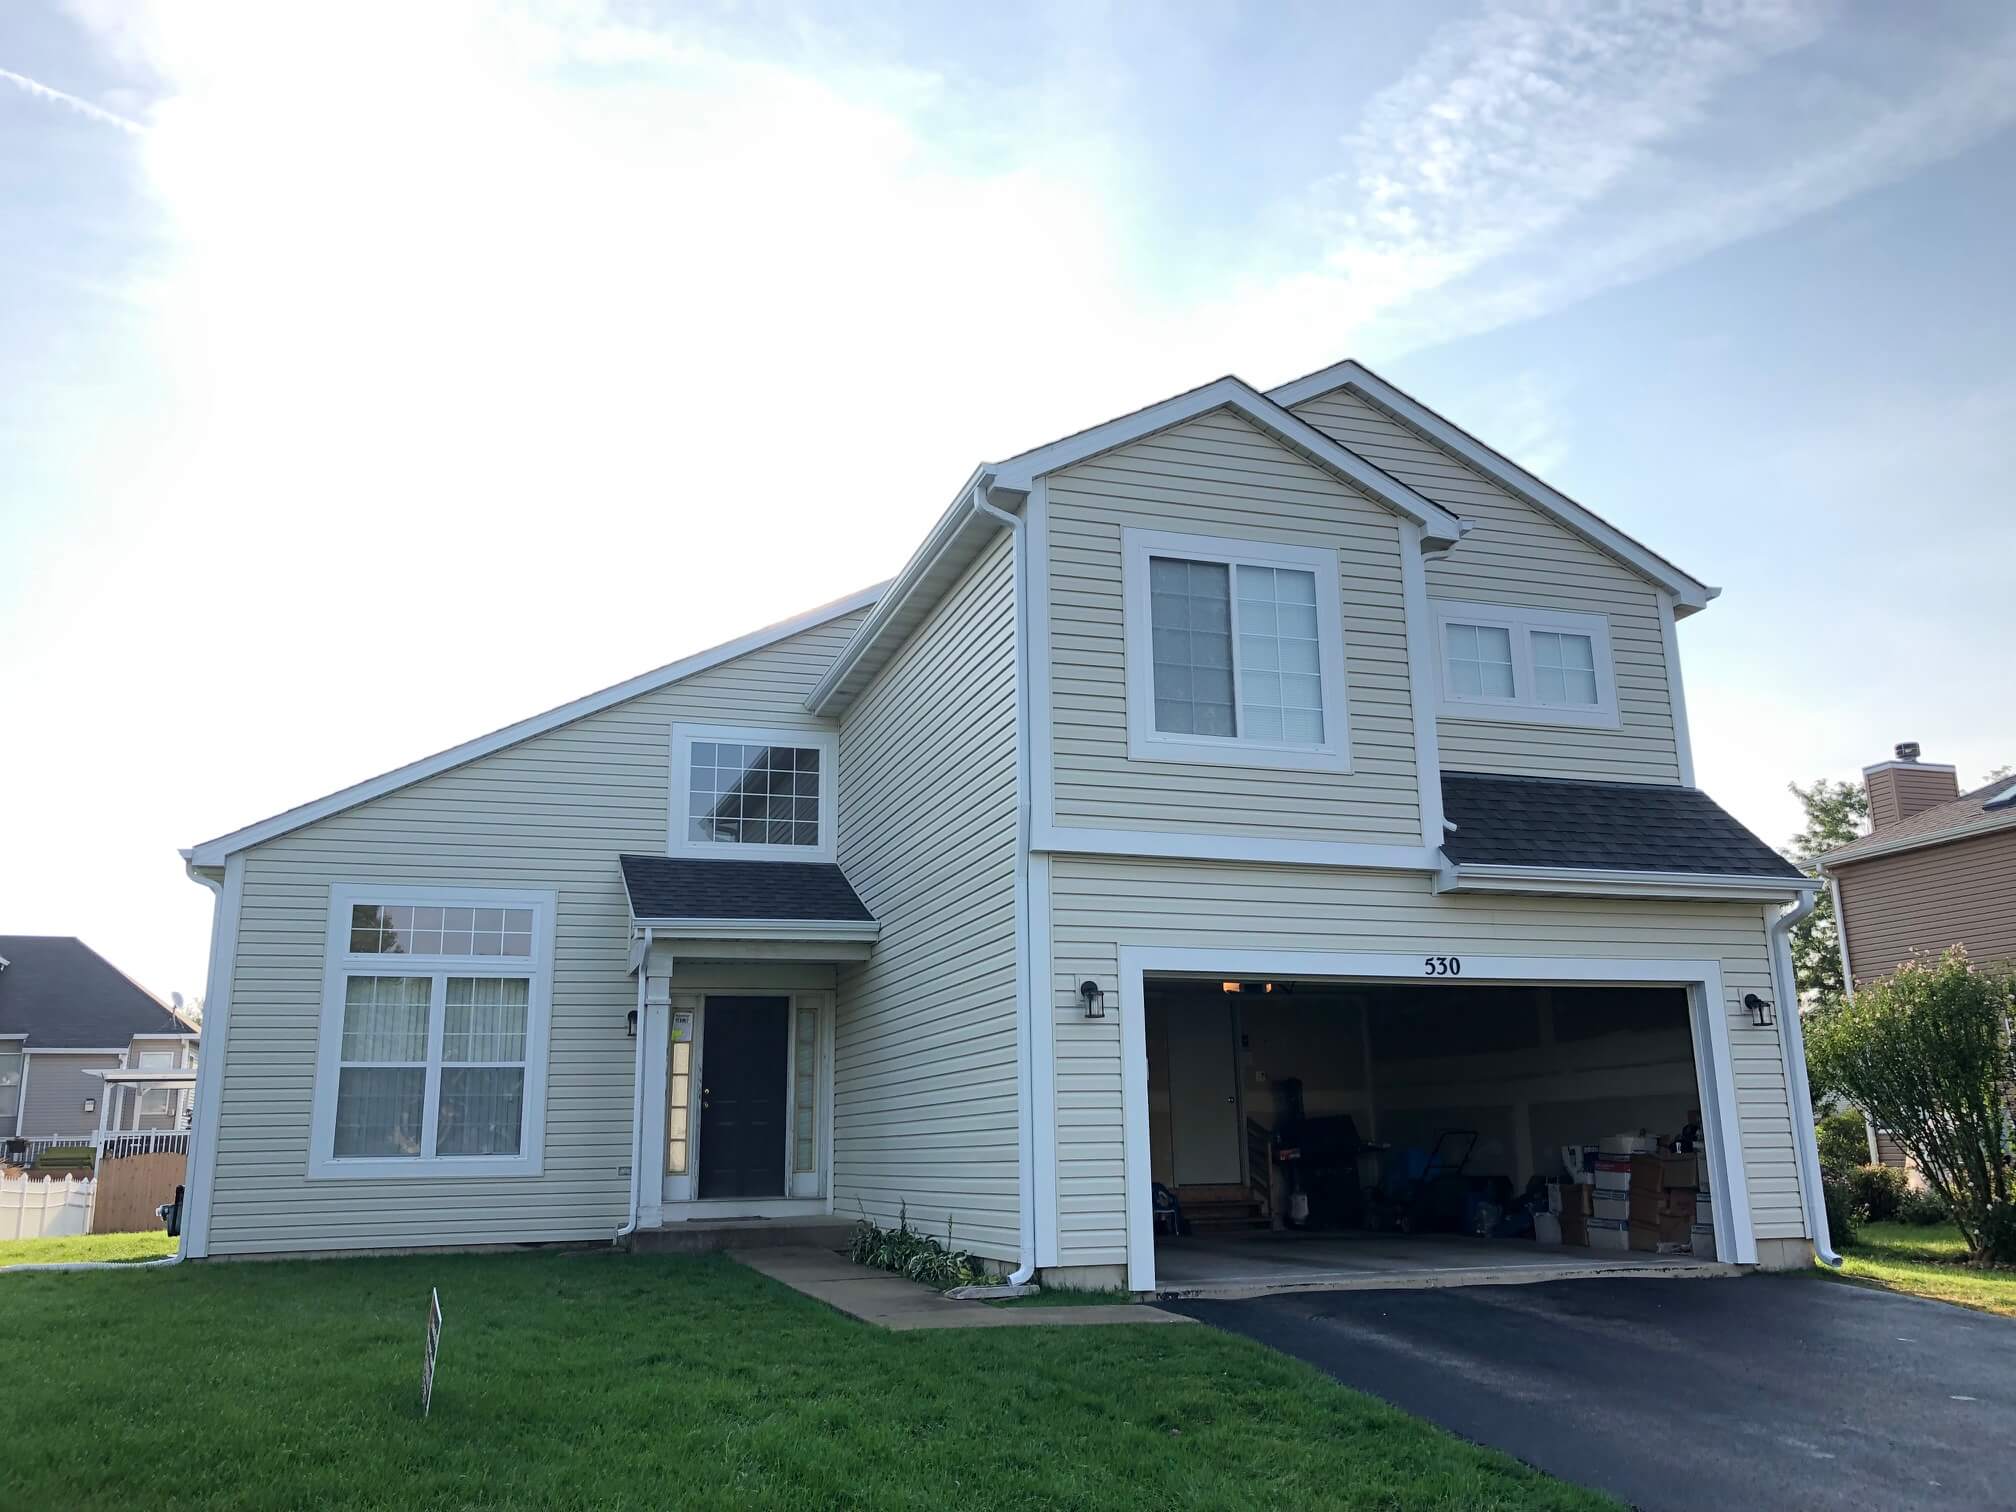 Residential Vinyl Full Siding Replacement by Promar Exteriors